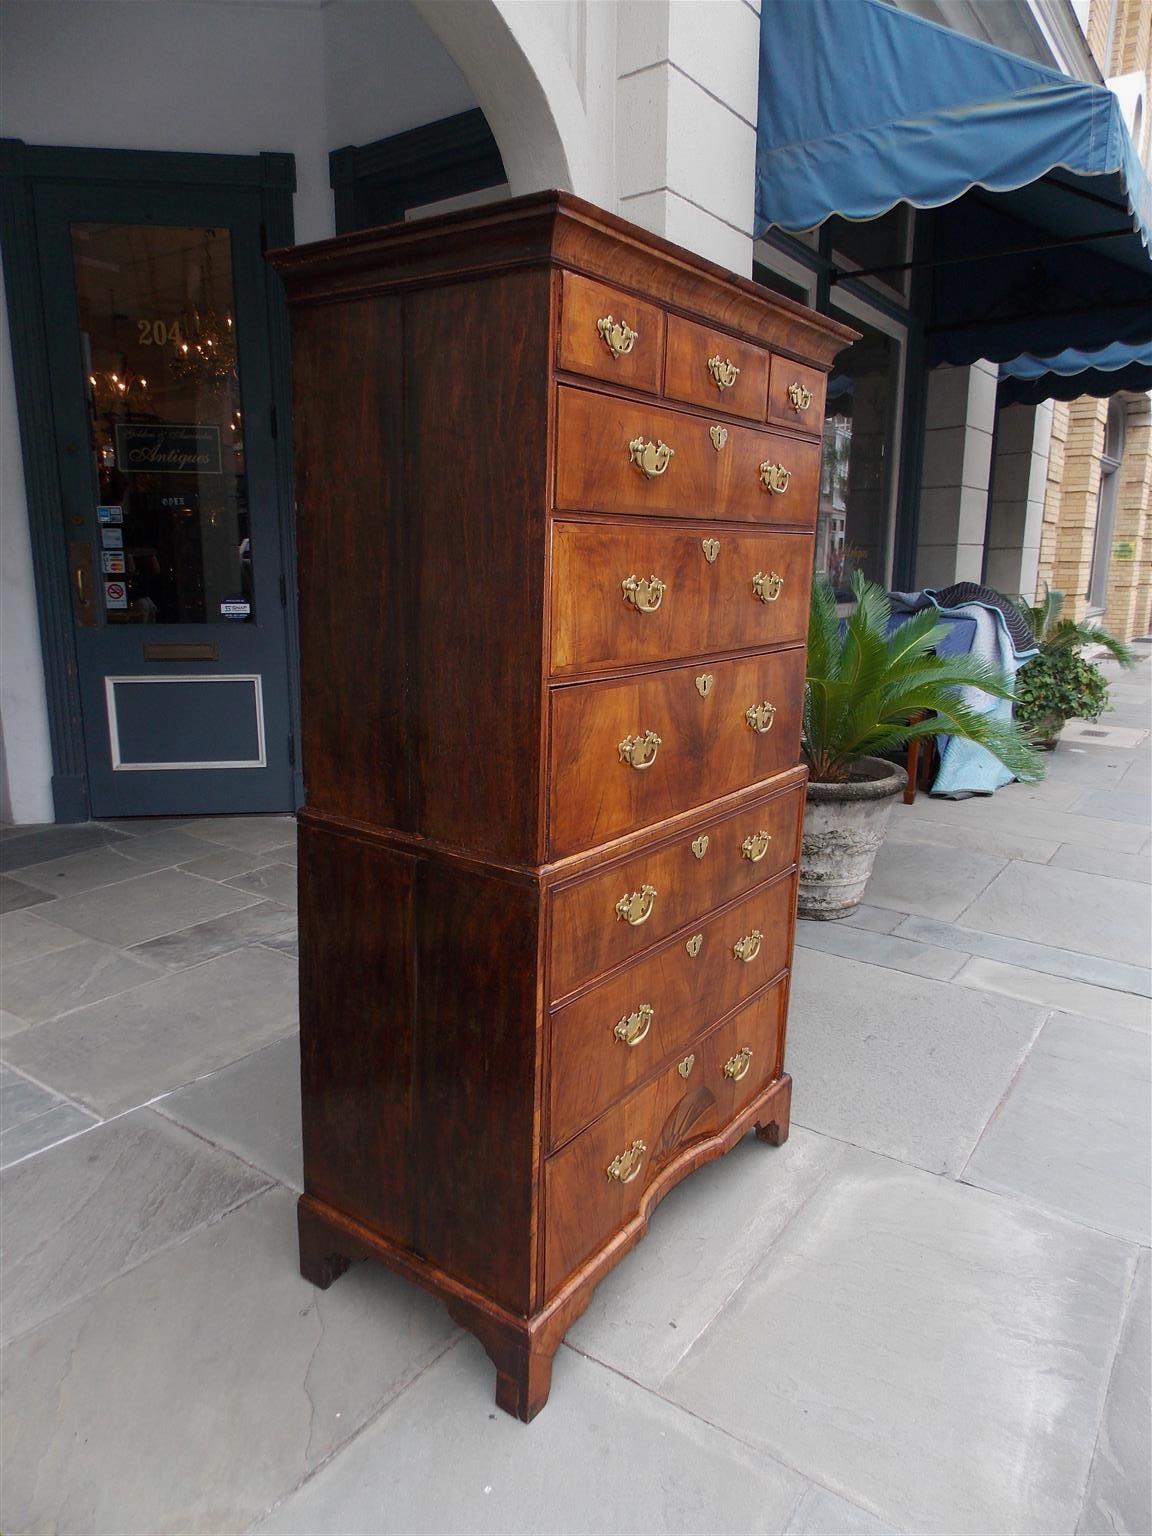 English Chippendale burl walnut chest on chest with a carved molded edge cornice, six graduated upper case drawers with hearing bone inlay, three graduated lower case drawers with hearing bone inlay, a recessed oval satinwood and ebony inlaid star,